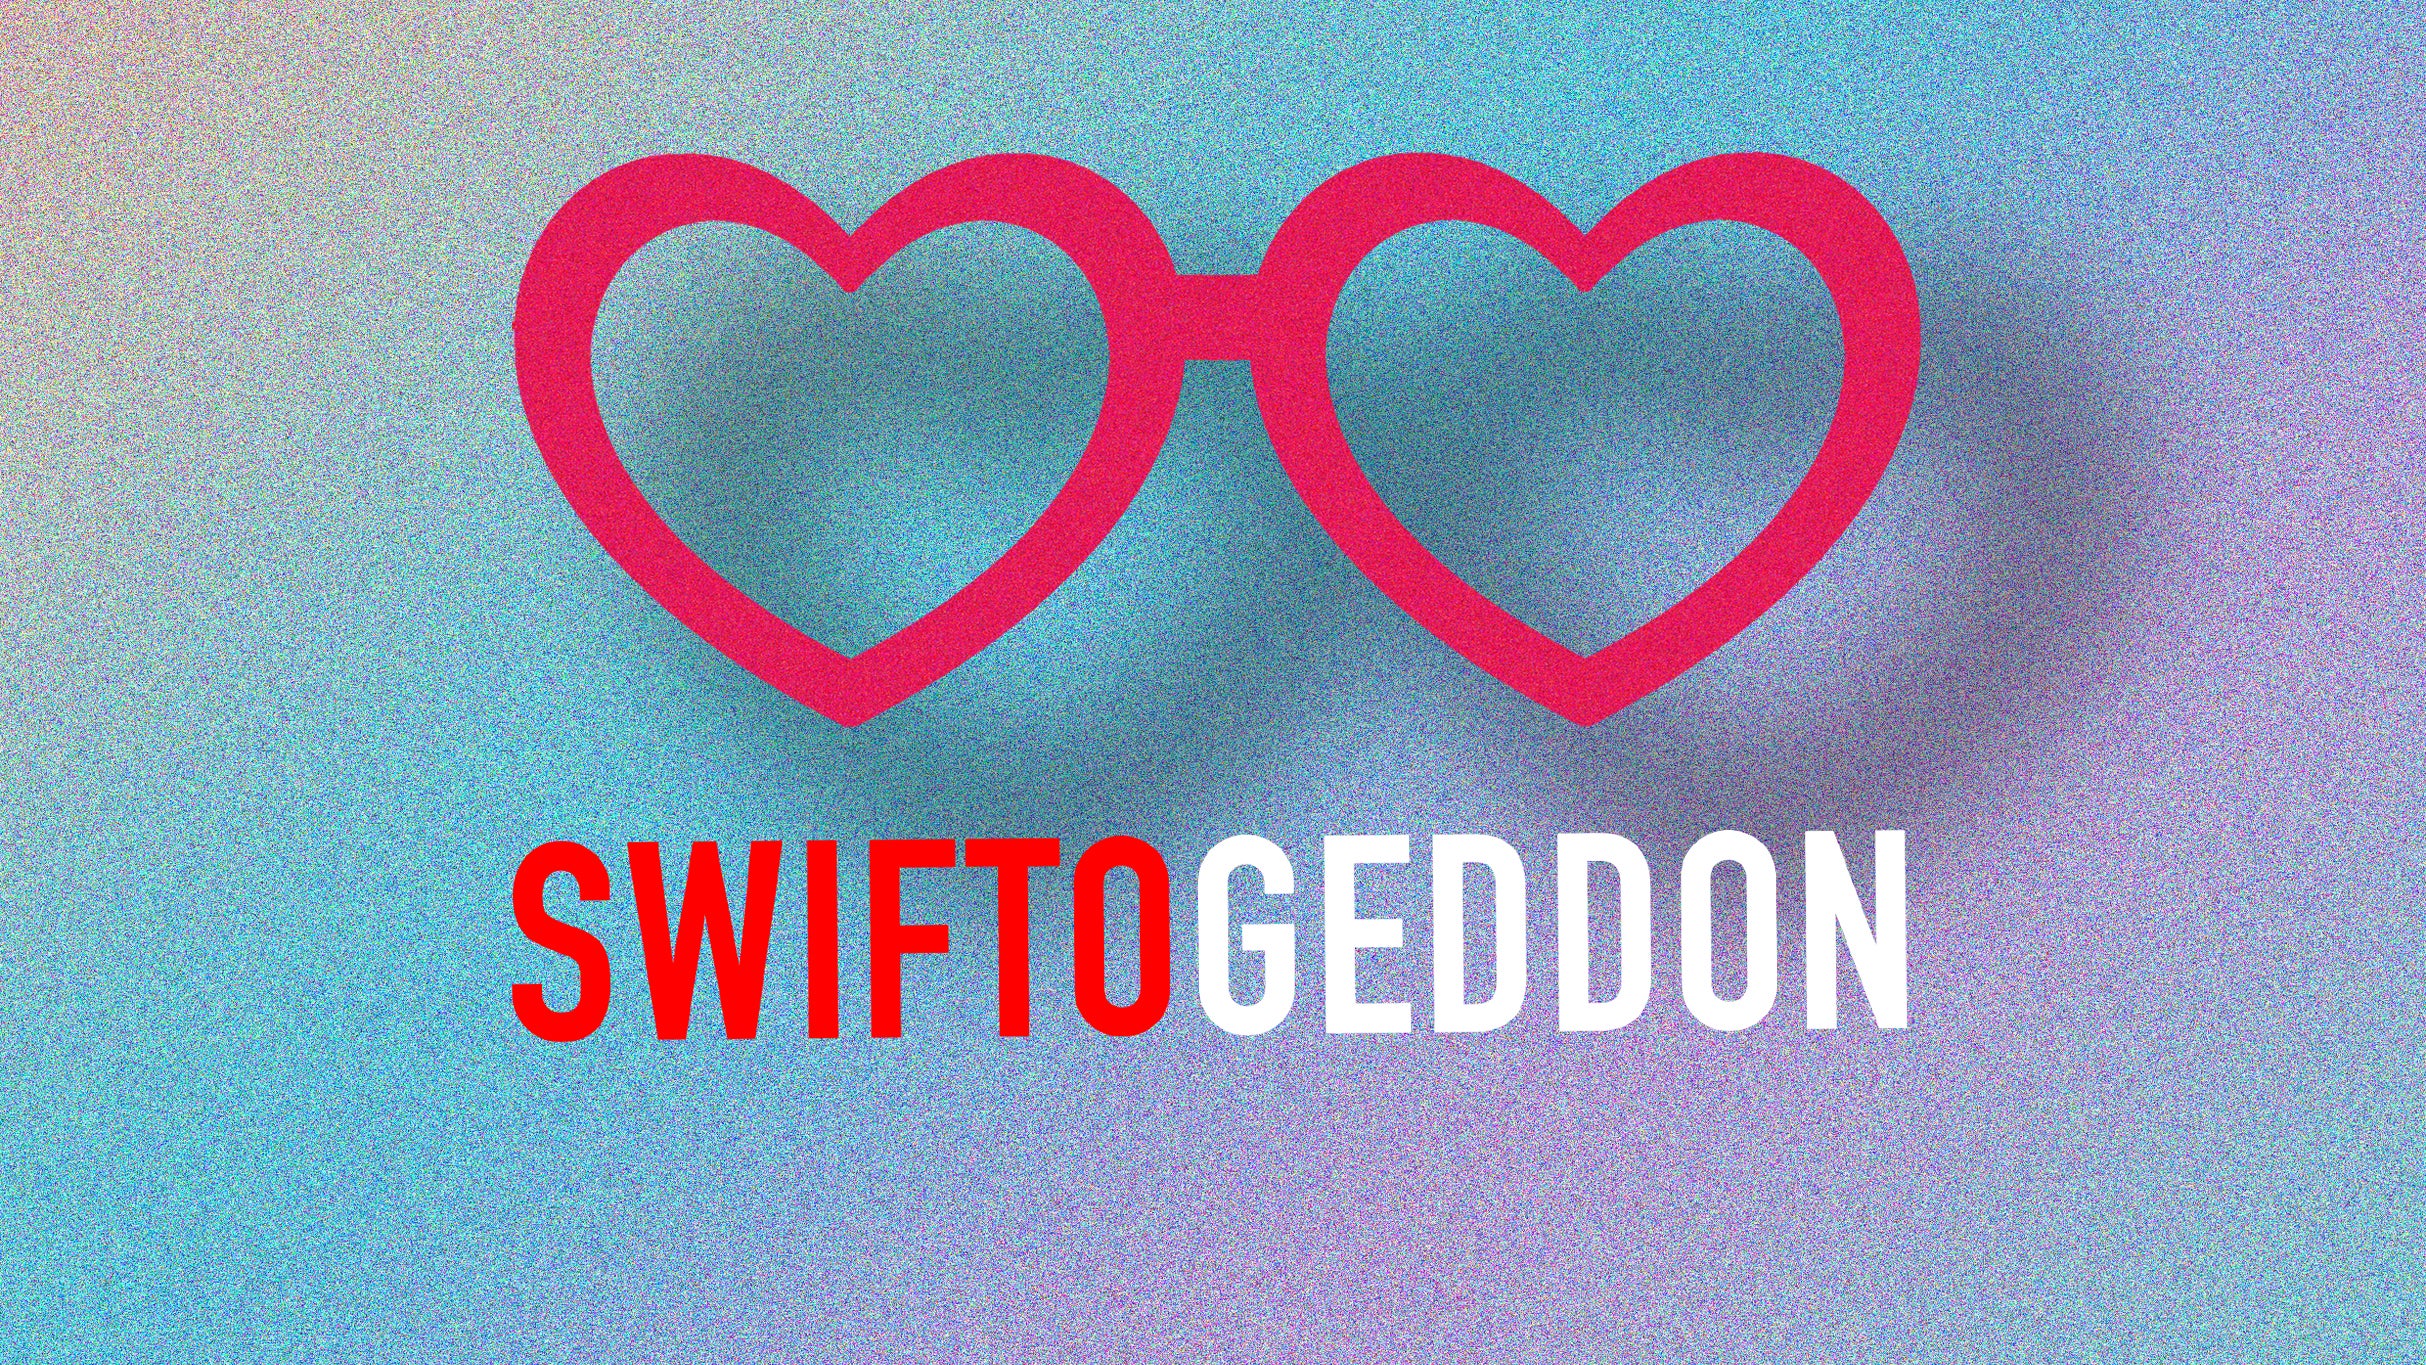 Swiftogeddon -  The Taylor Swift Club Night Event Title Pic